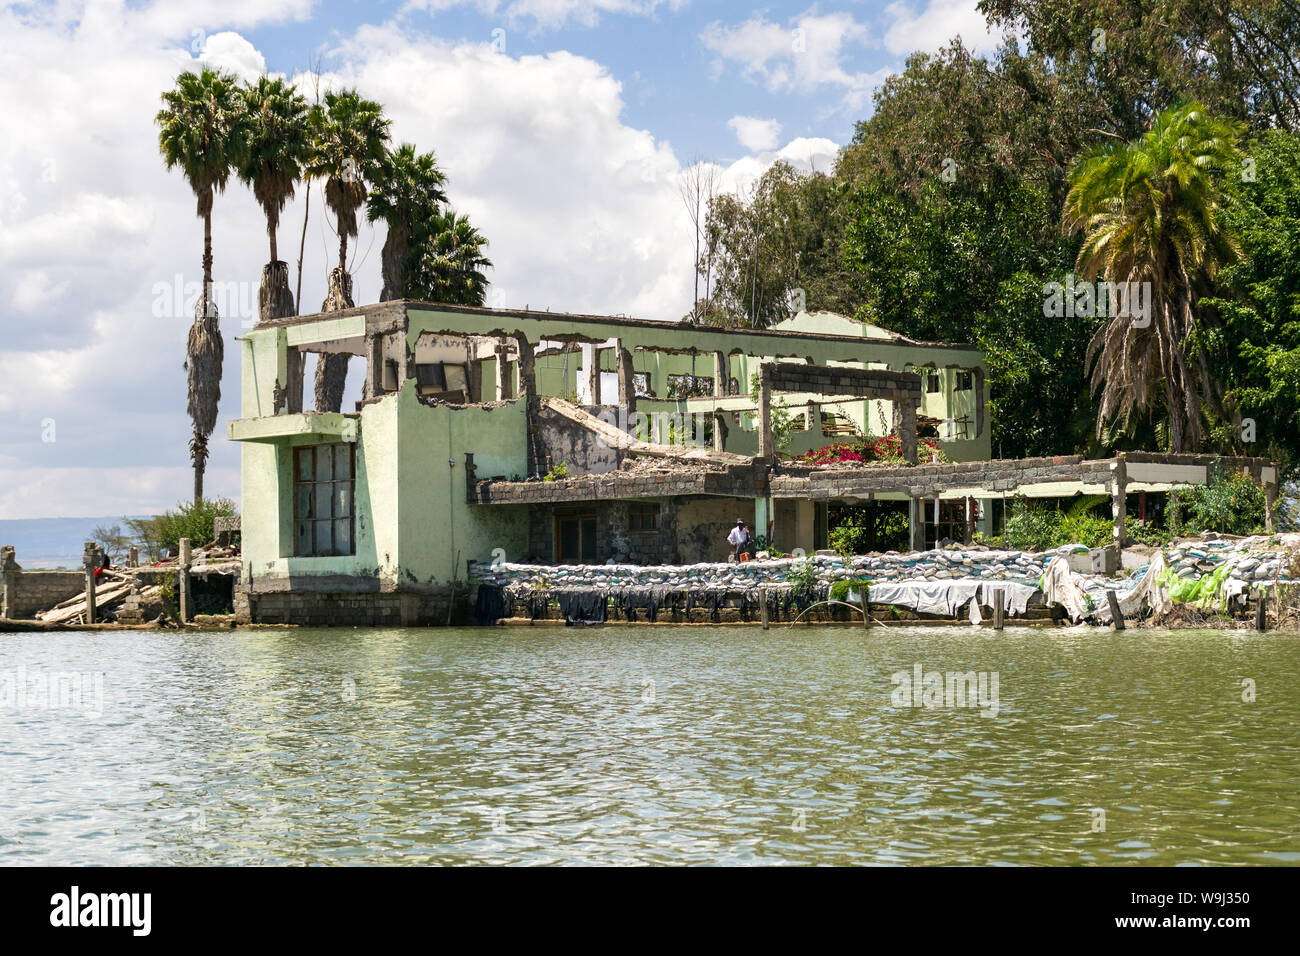 A dilapidated ruined building due to rising water levels on the shore of lake Naivaha, Kenya, East Africa Stock Photo